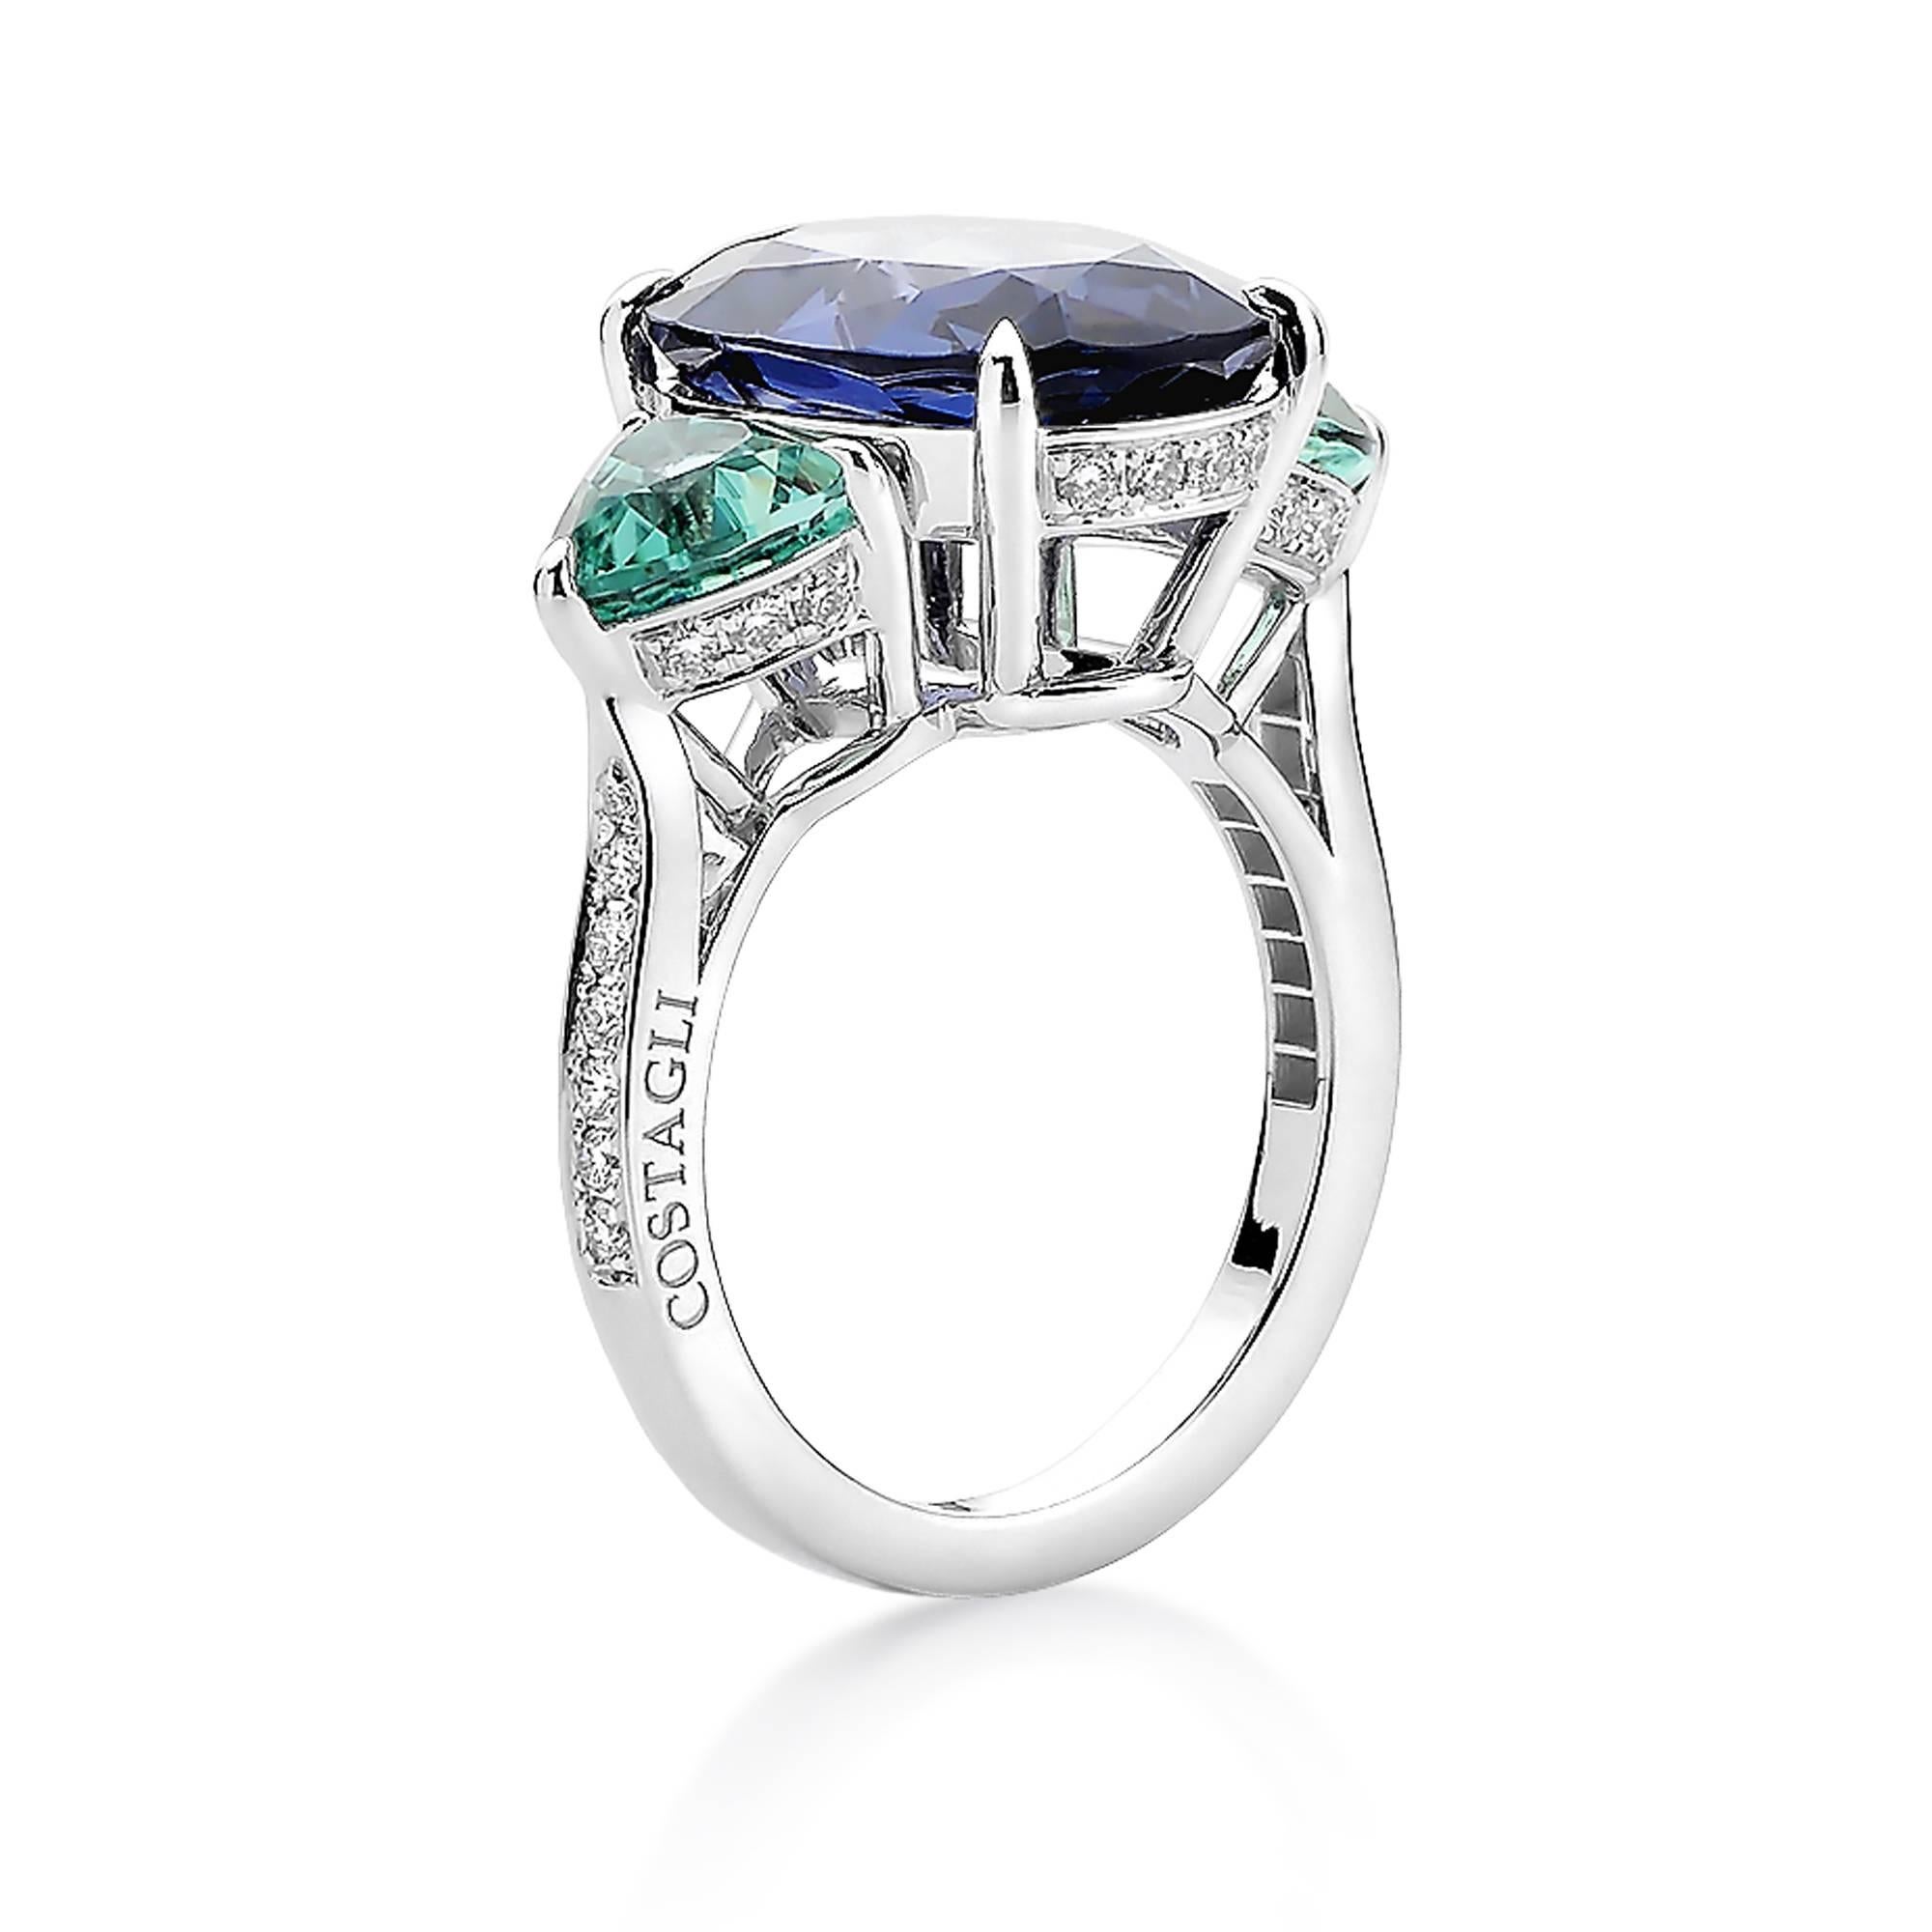 One of a kind cushion shape blue spinel 8.18 carat ring flanked by trillion shape lagoon tourmalines, 2.32 carats set in 18kt white gold with pave-set round, brilliant diamonds, 0.33 carats.

Clean lines, perfection of cutting techniques, exquisite